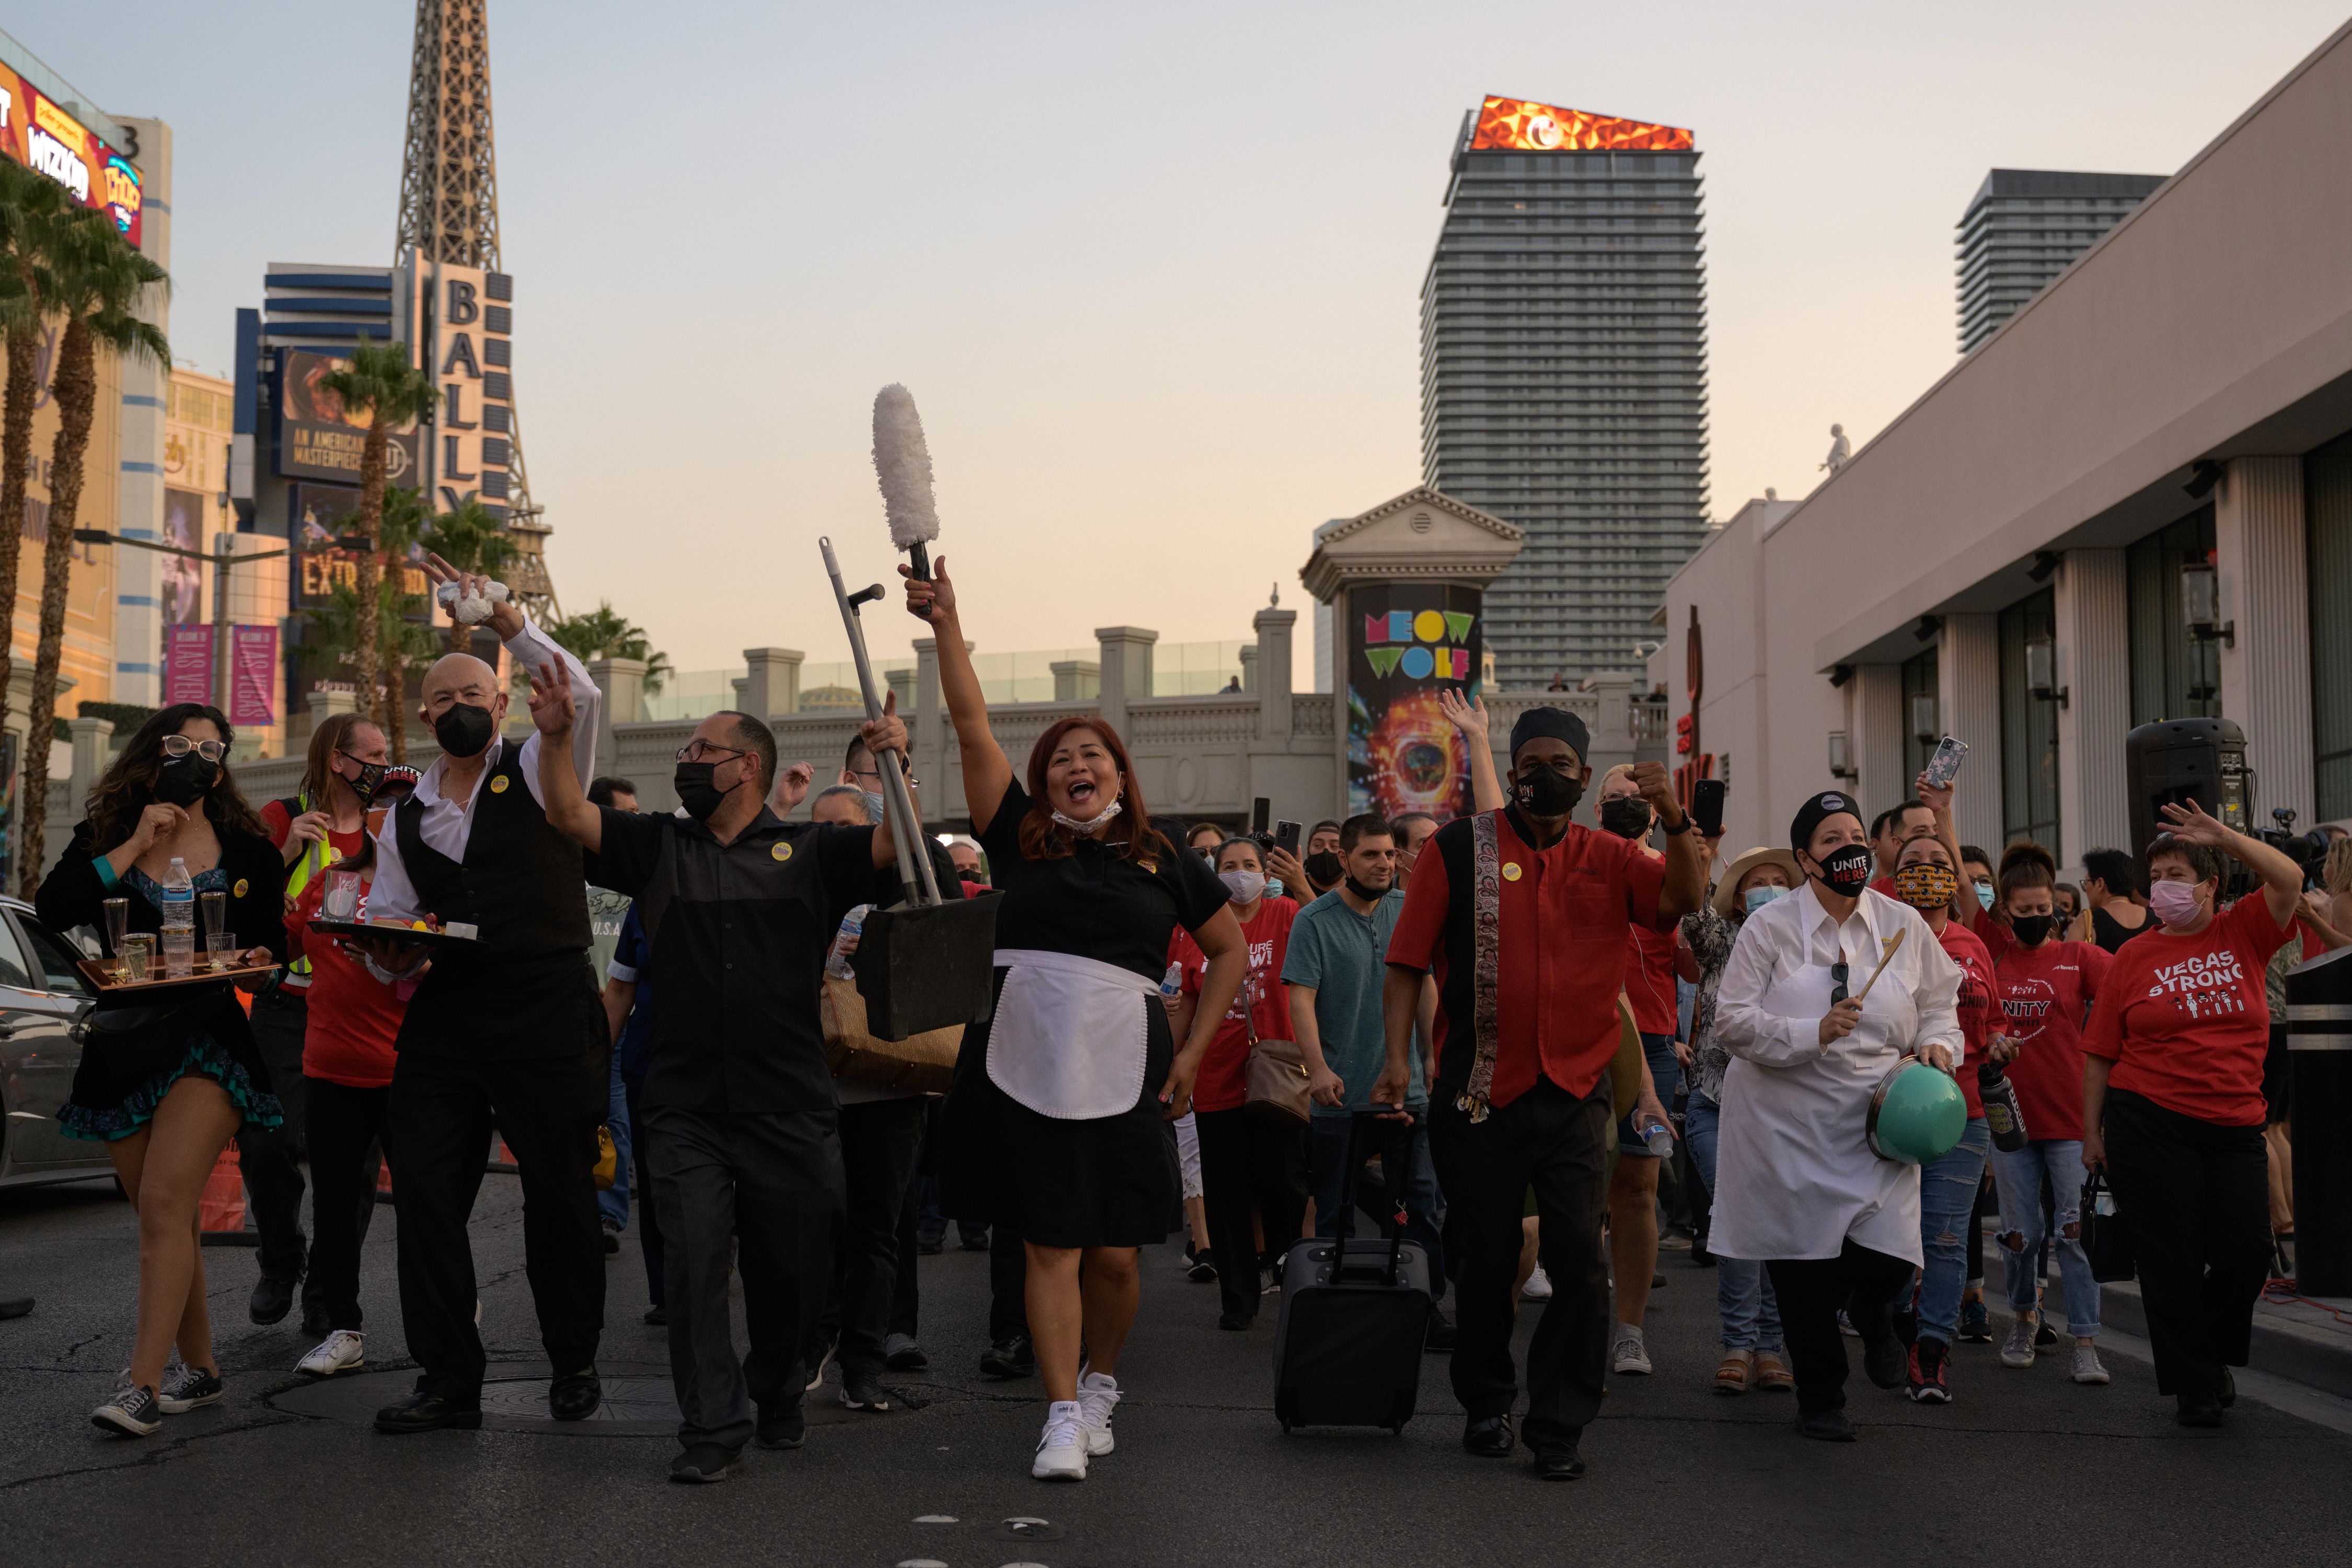 People dressed in hotel and restaurant uniforms march down the Las Vegas Strip at sunset.